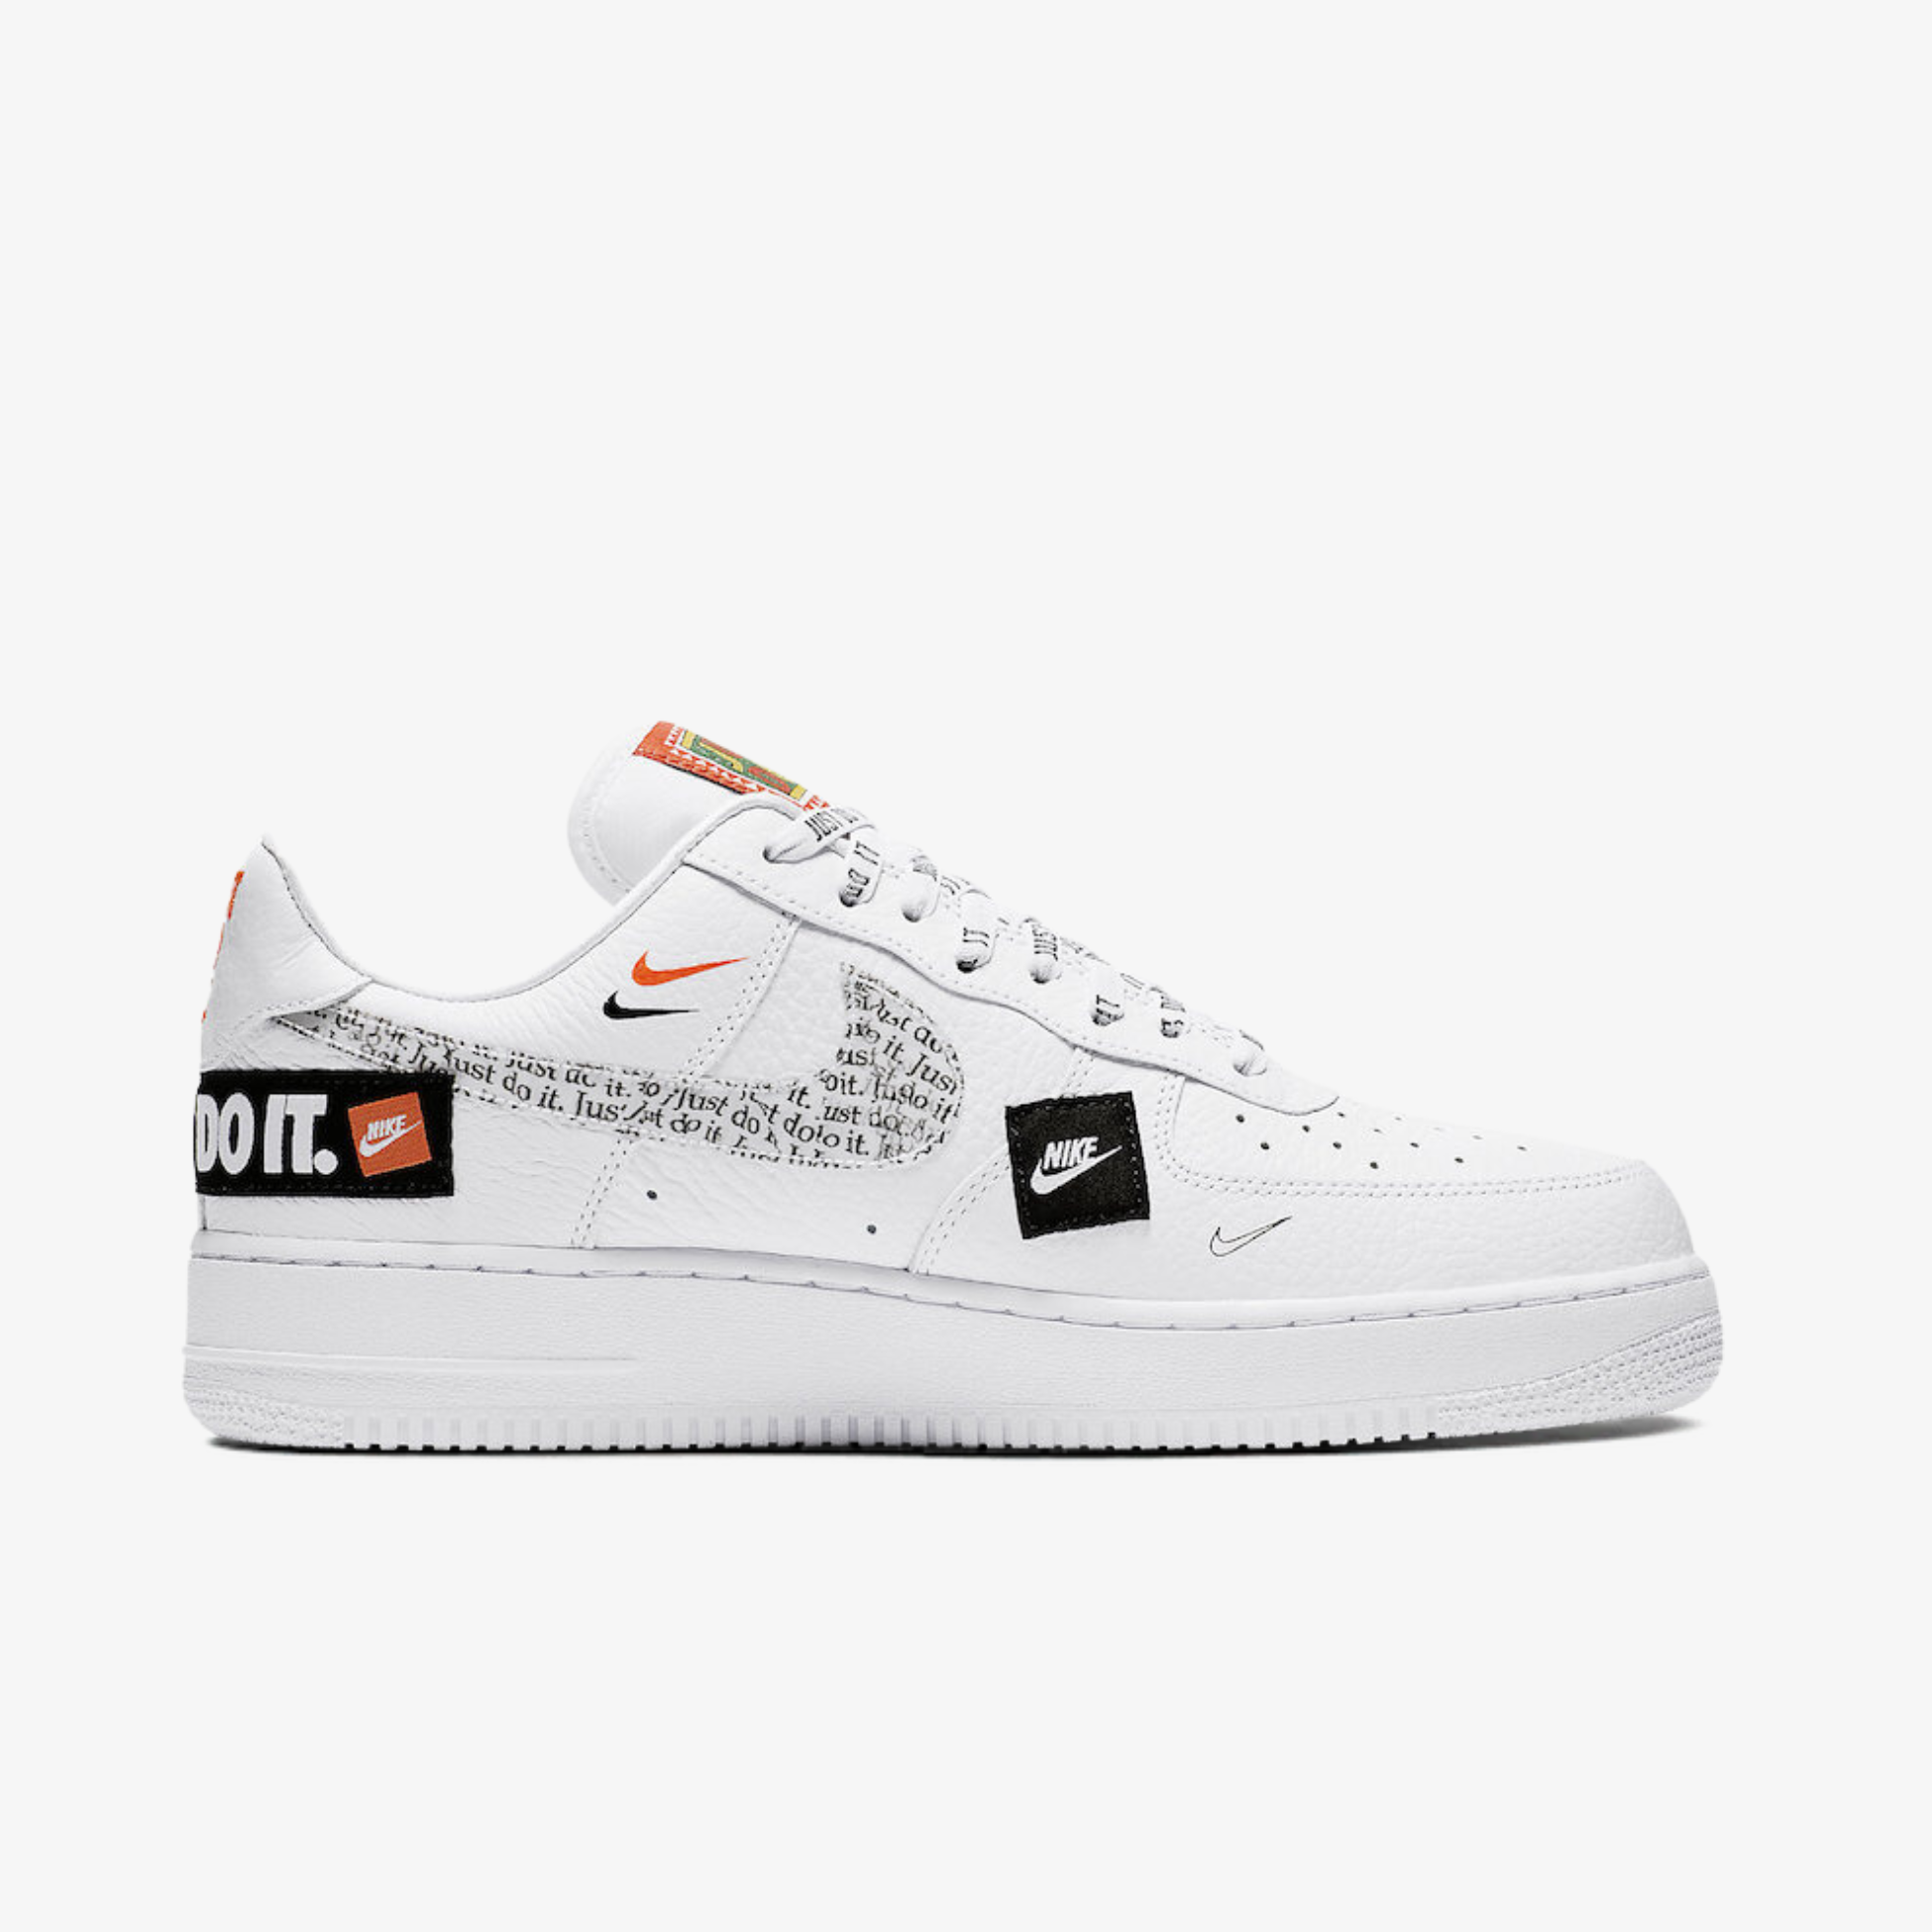 Nike Air Force 1 '07 PRM "Just Do It" Bianco